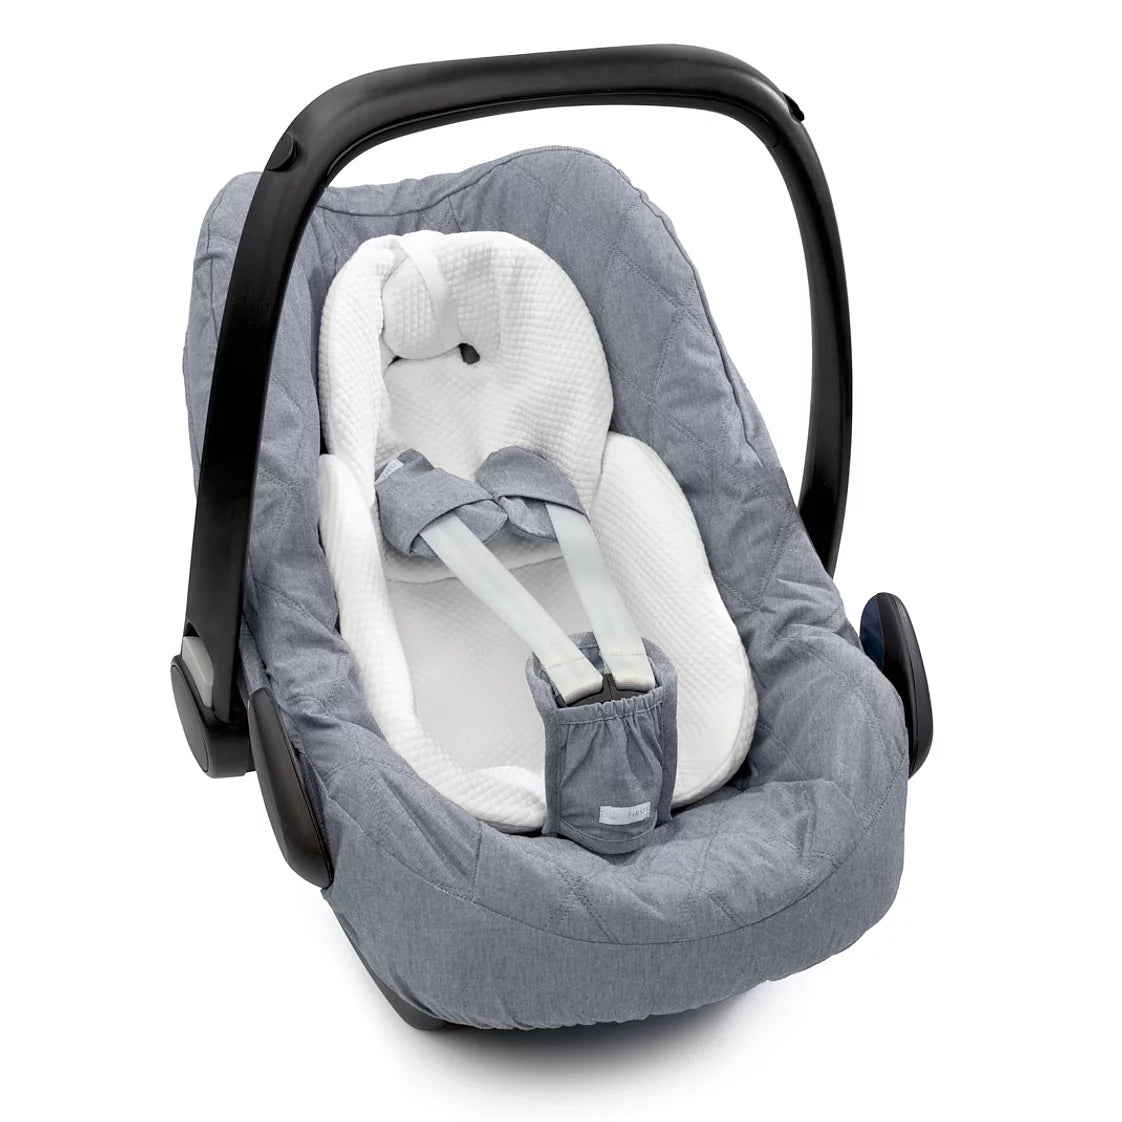 First True Blue Cover for Maxicosi Car Seat